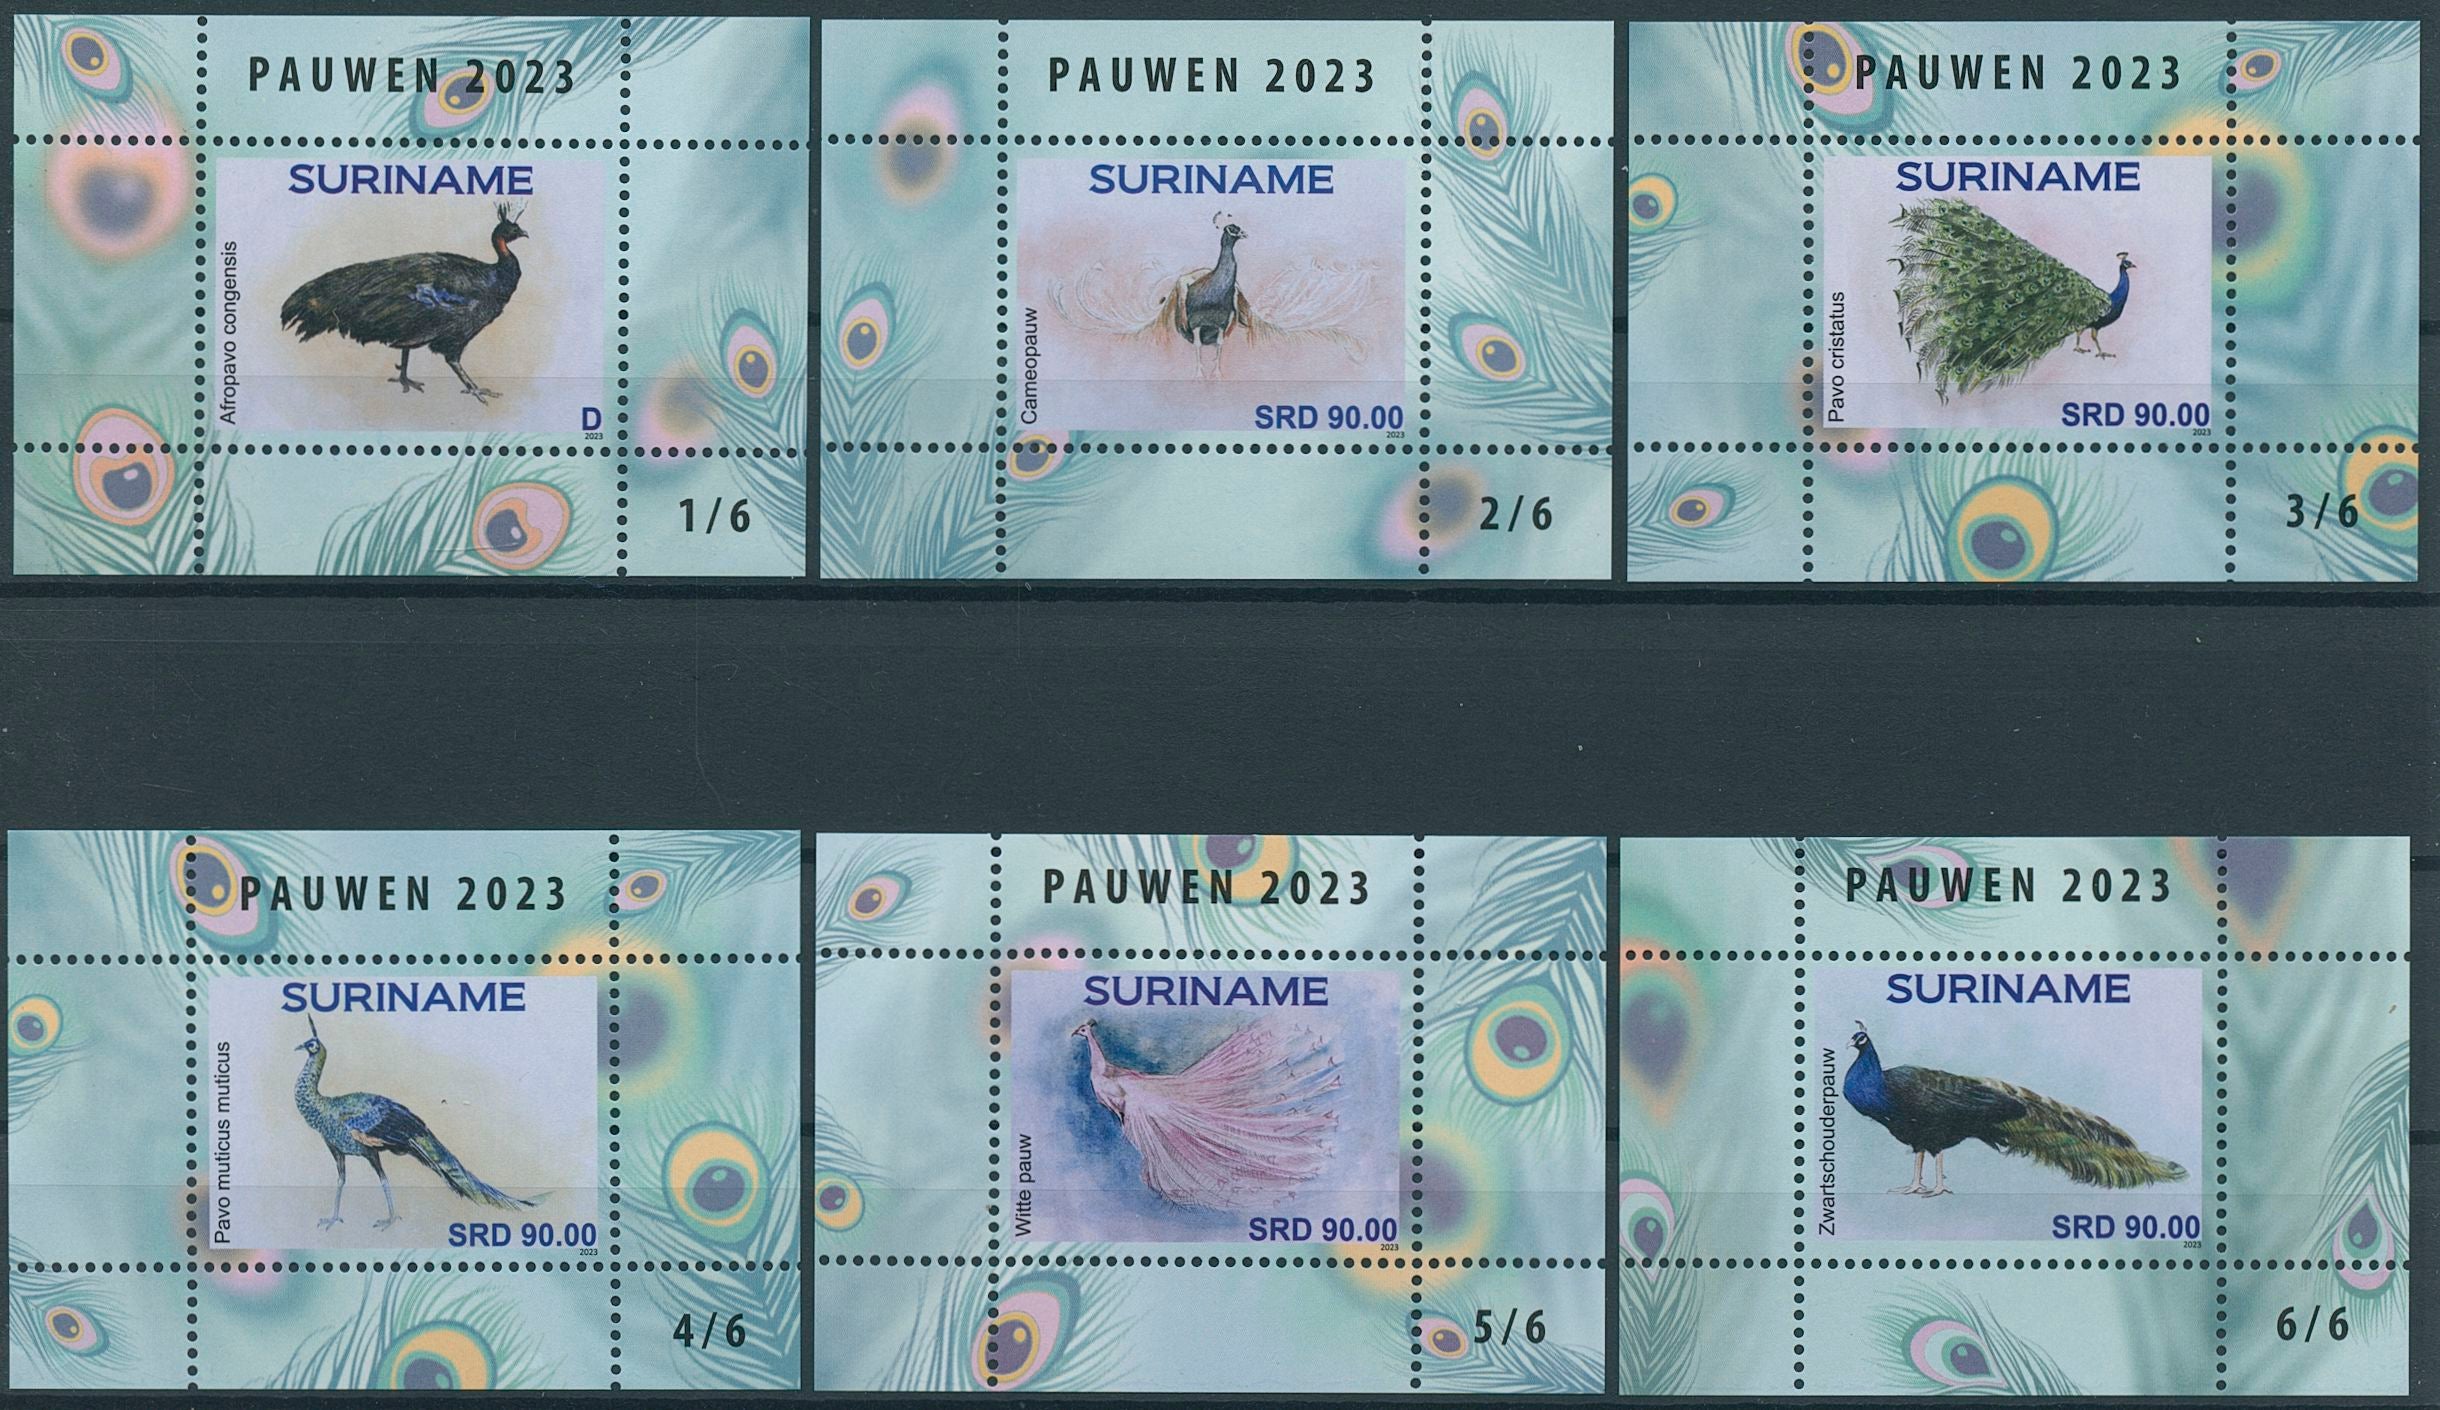 Suriname 2023 MNH Birds on Stamps Peafowl Peacocks 6x 1v M/S